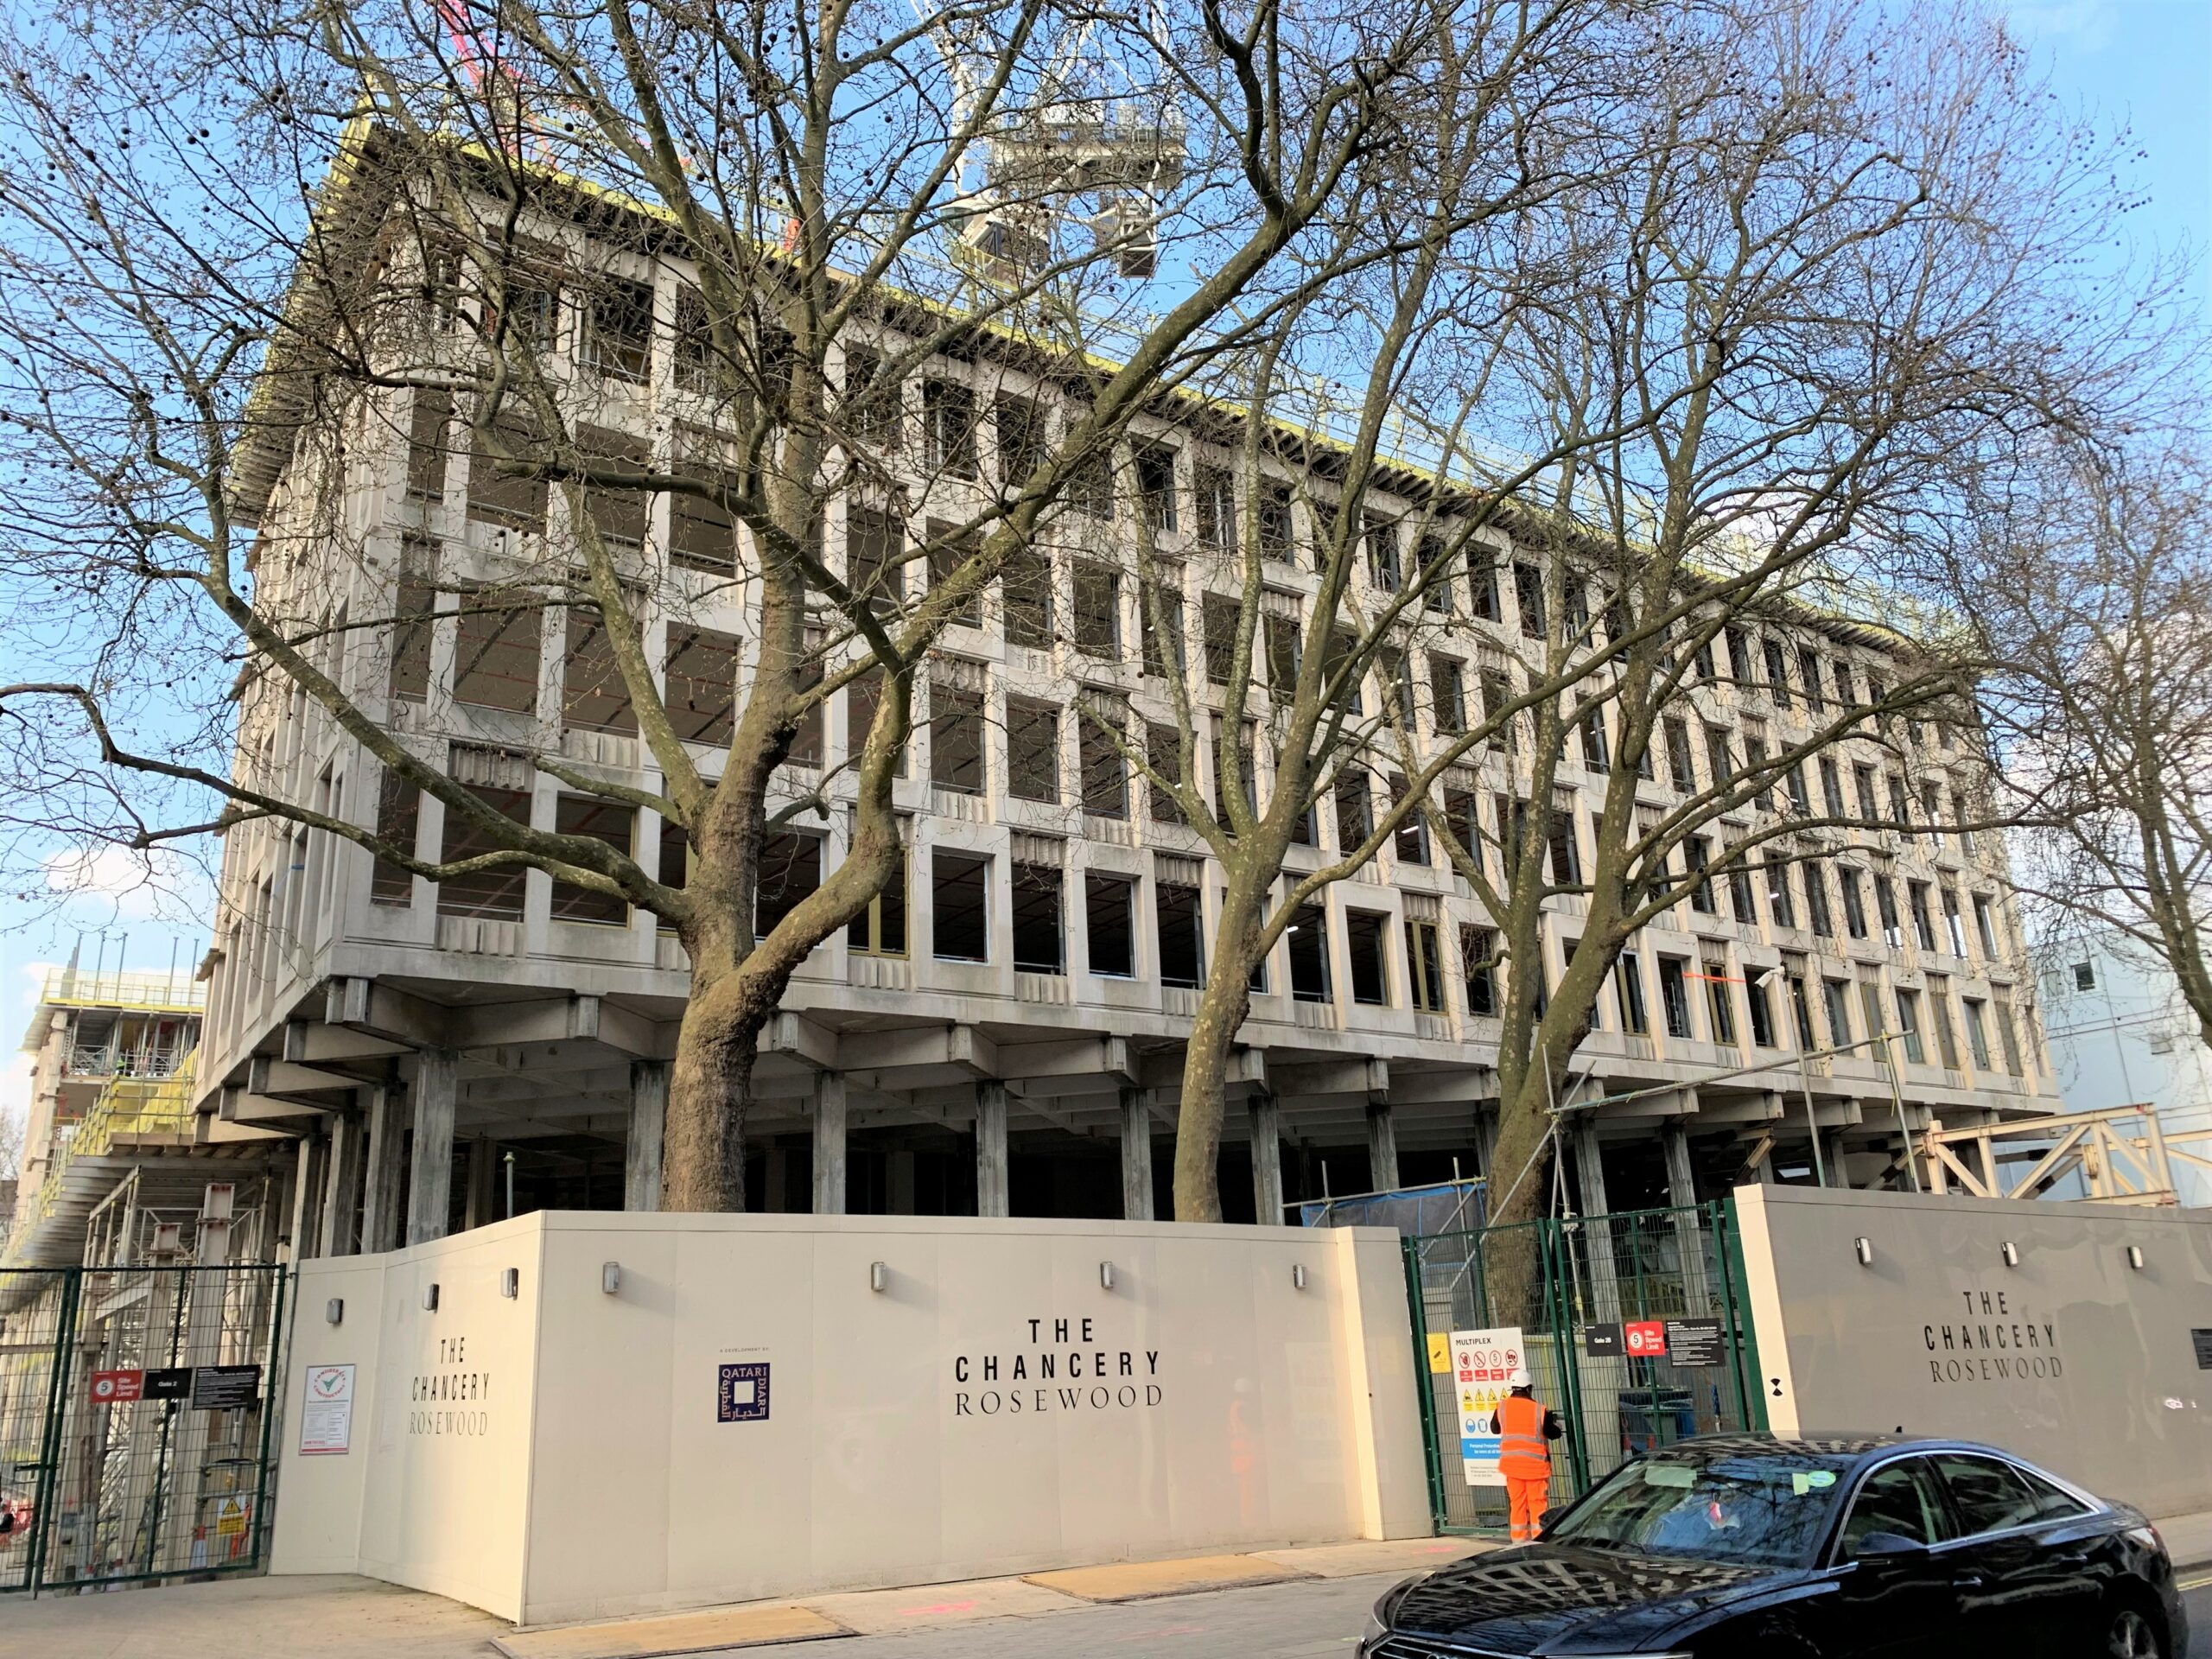 The Chancery Rosewood, 30 Grosvenor Square